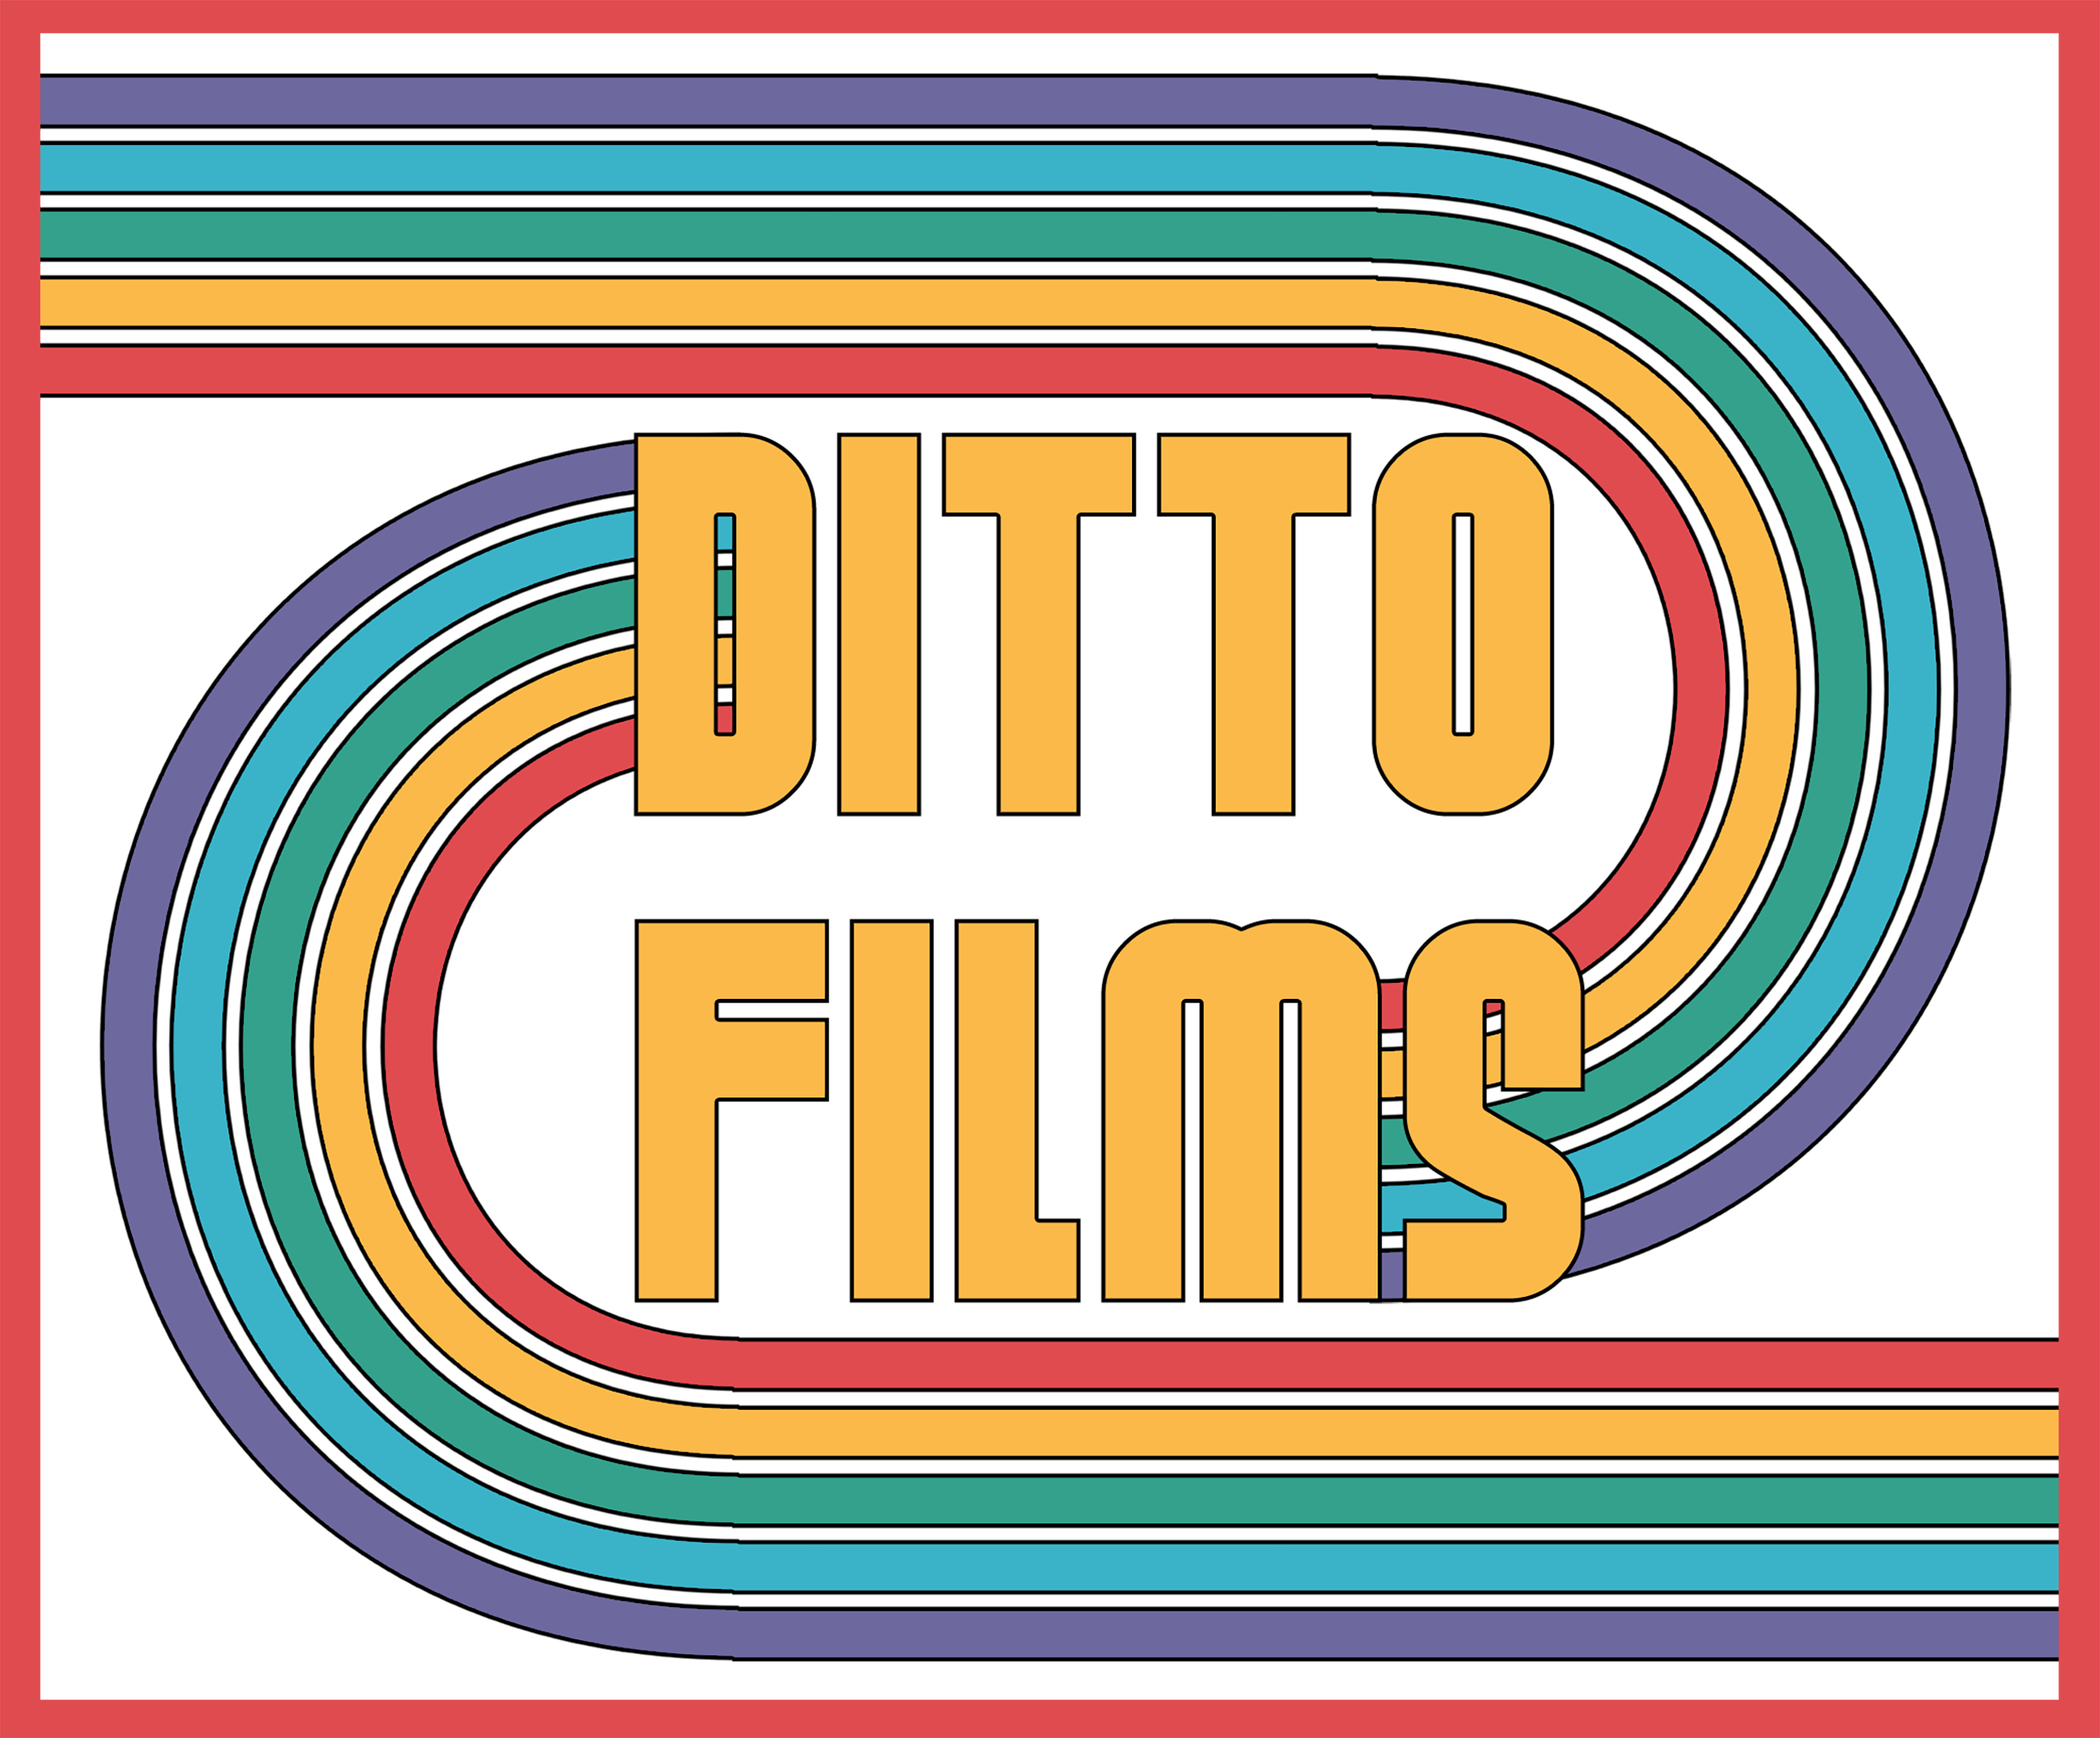  				 	DITTO FILMS